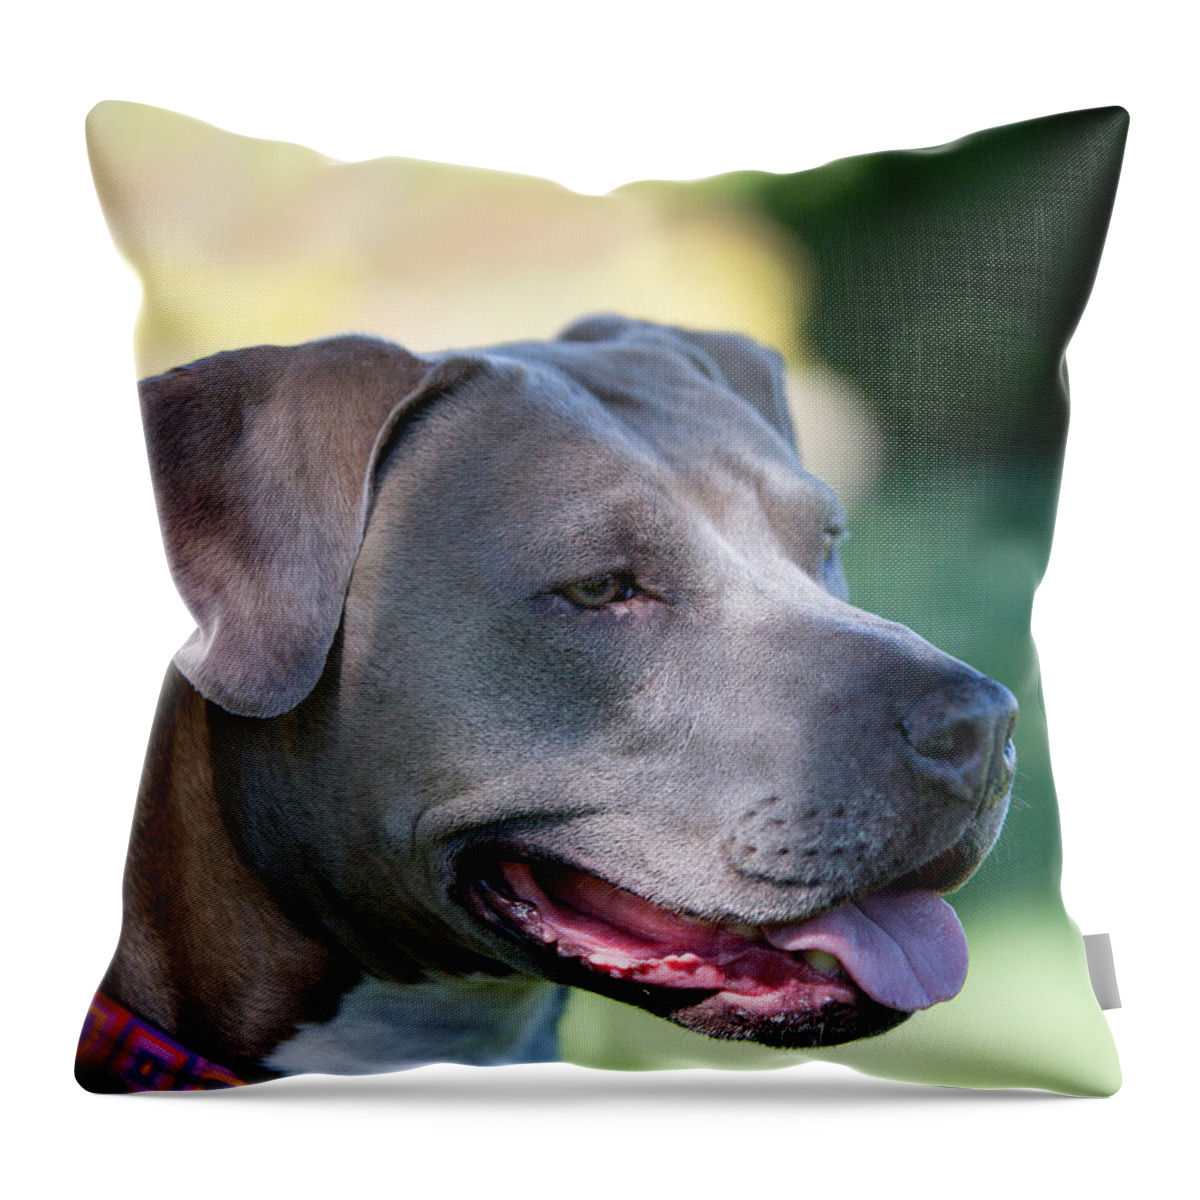  Throw Pillow featuring the photograph Ruby 24 by Rebecca Cozart